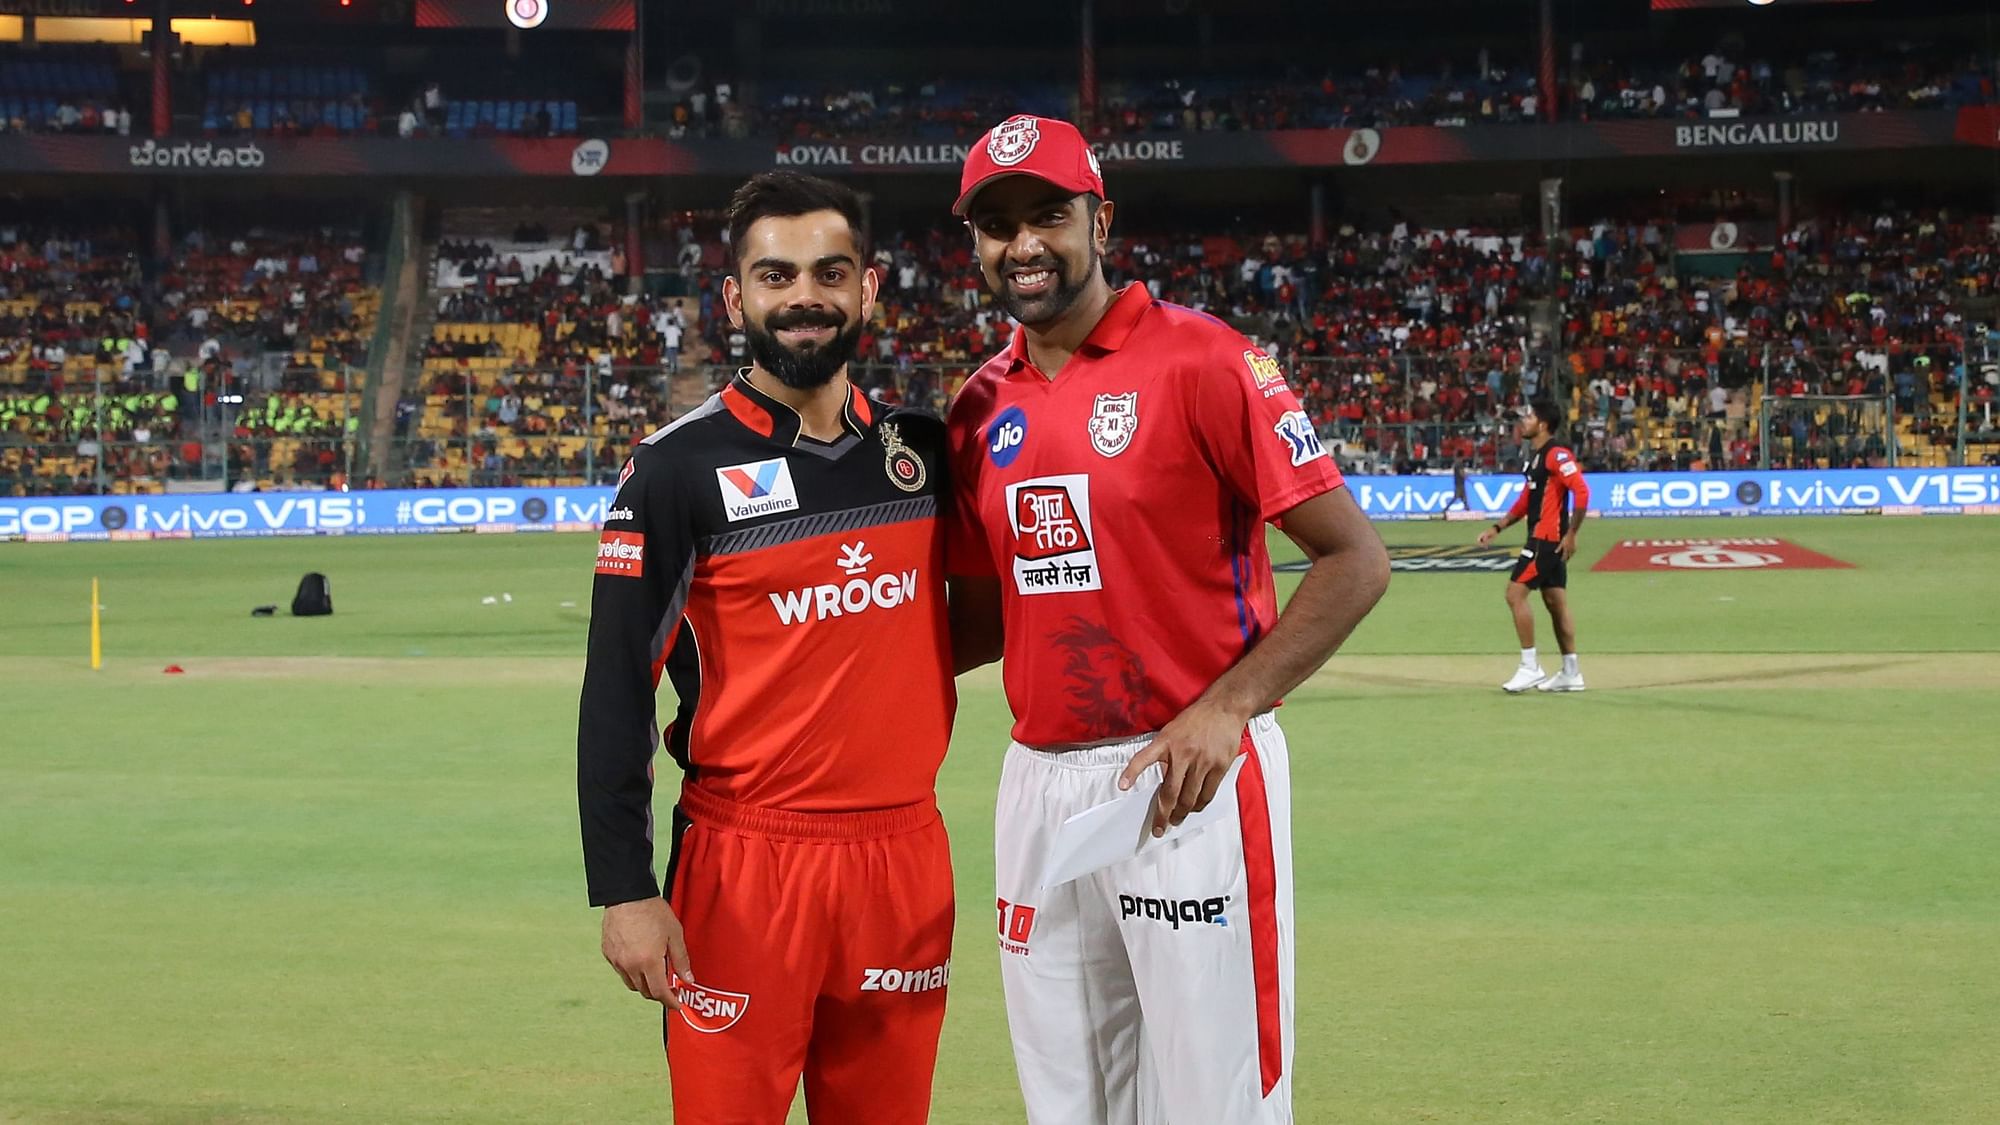 Kings XI Punjab have won the toss and elected to bowl first against Royal Challengers Bangalore in Bengaluru.